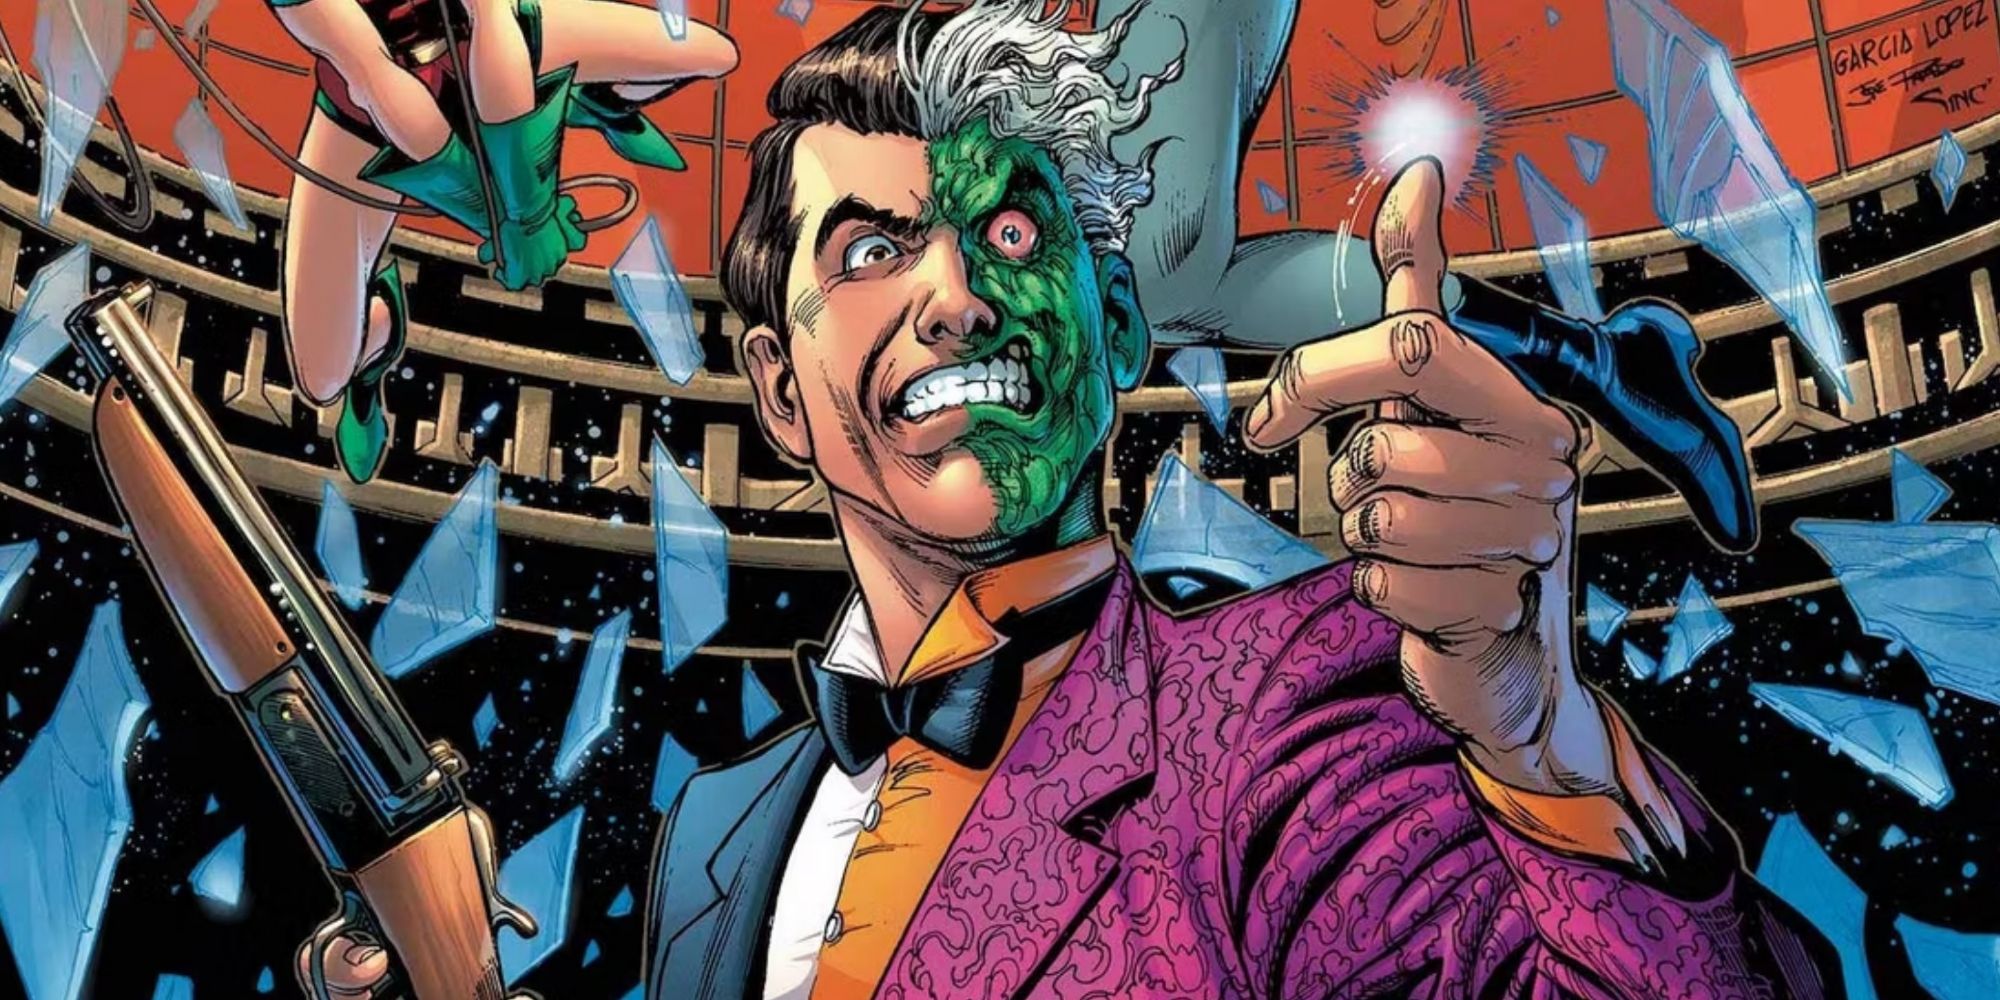 Two-Face flipping his coin as Batman and Robin converge on him in DC Comics.